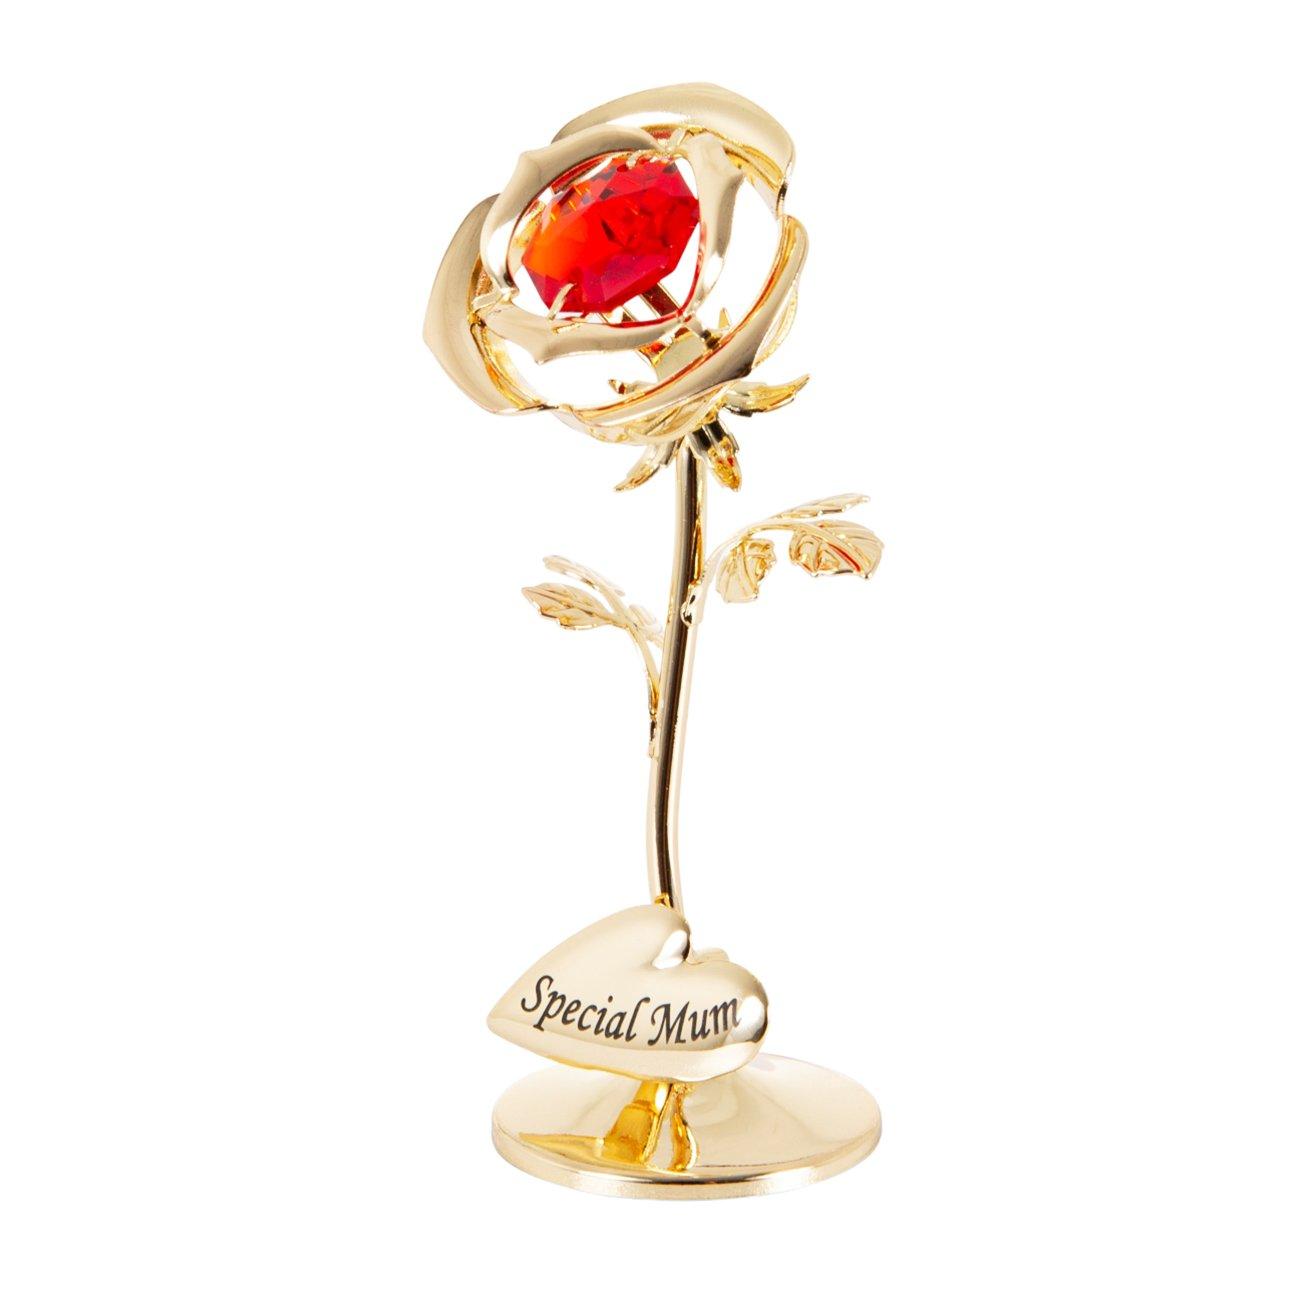 Special Mum Heart Gold Plated Petite Rose Ornament with Red Austrian Crystal by Happy Homewares